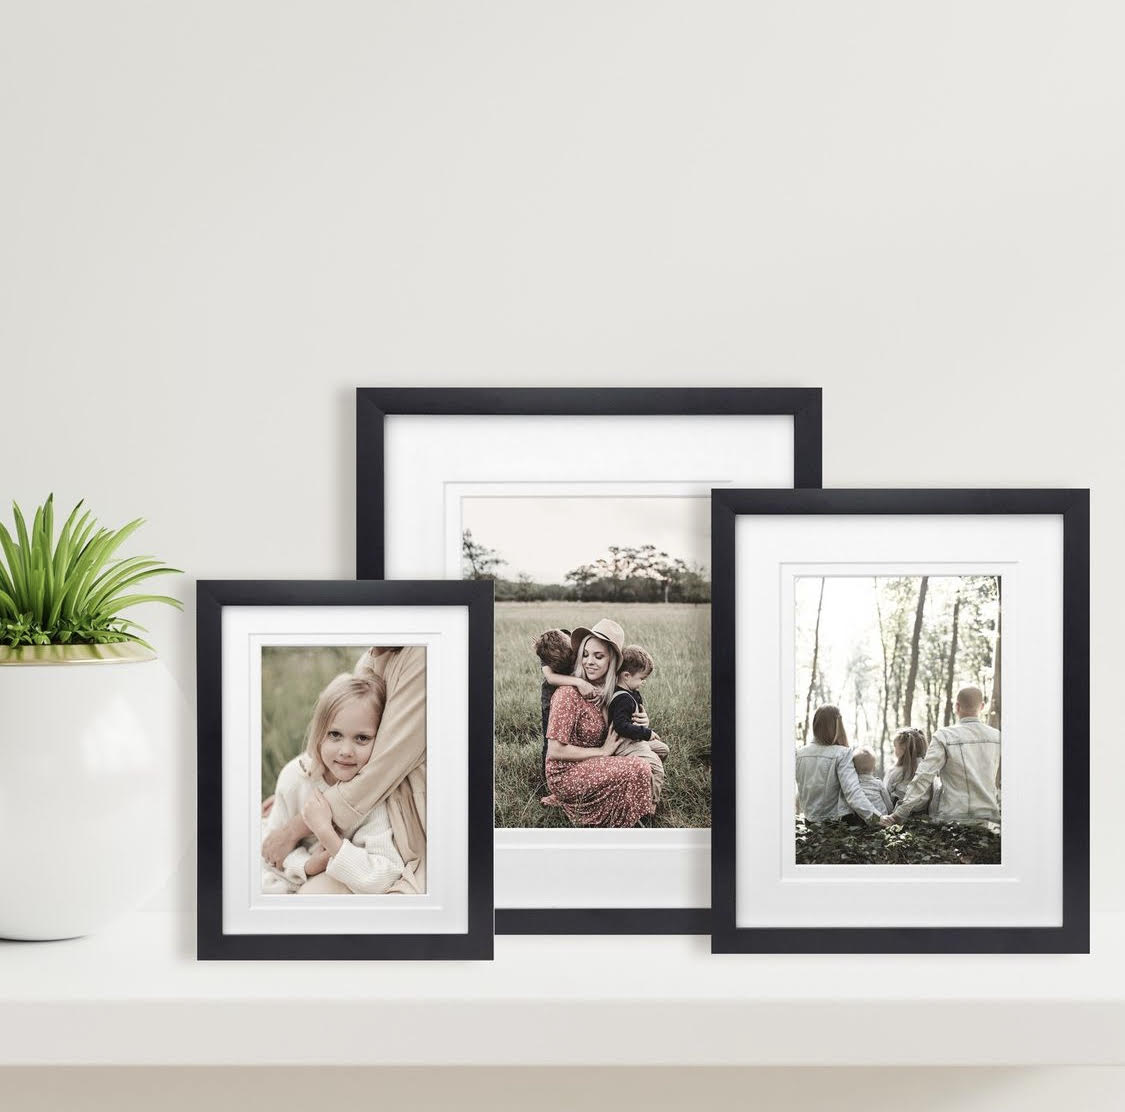 6x8” black timber frame with matboard to suit 6x4” photo